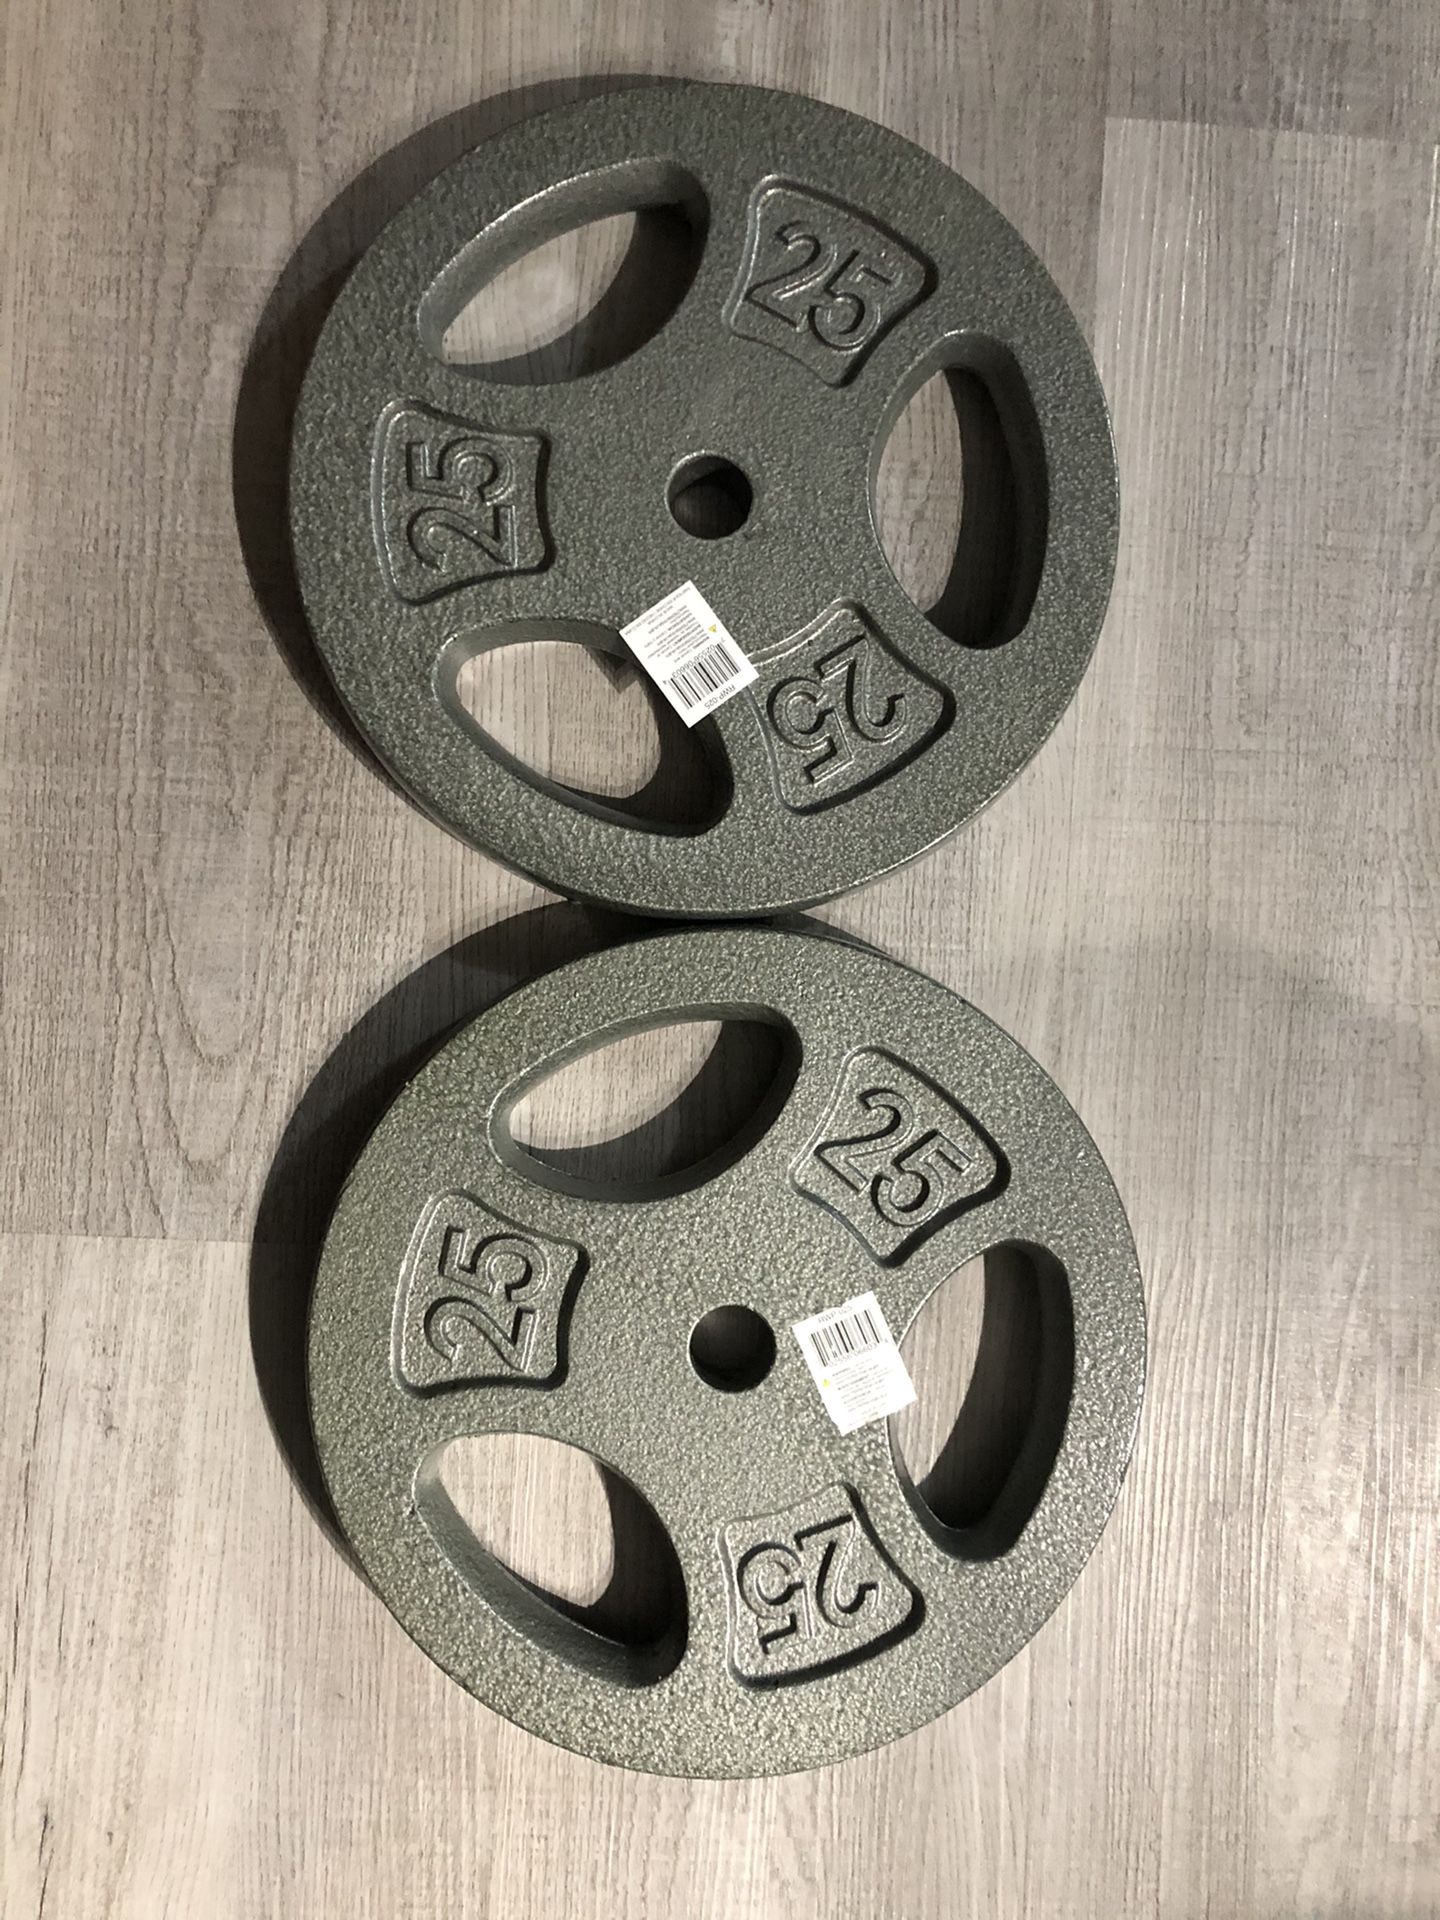 25 lbs brand new 1inch weights